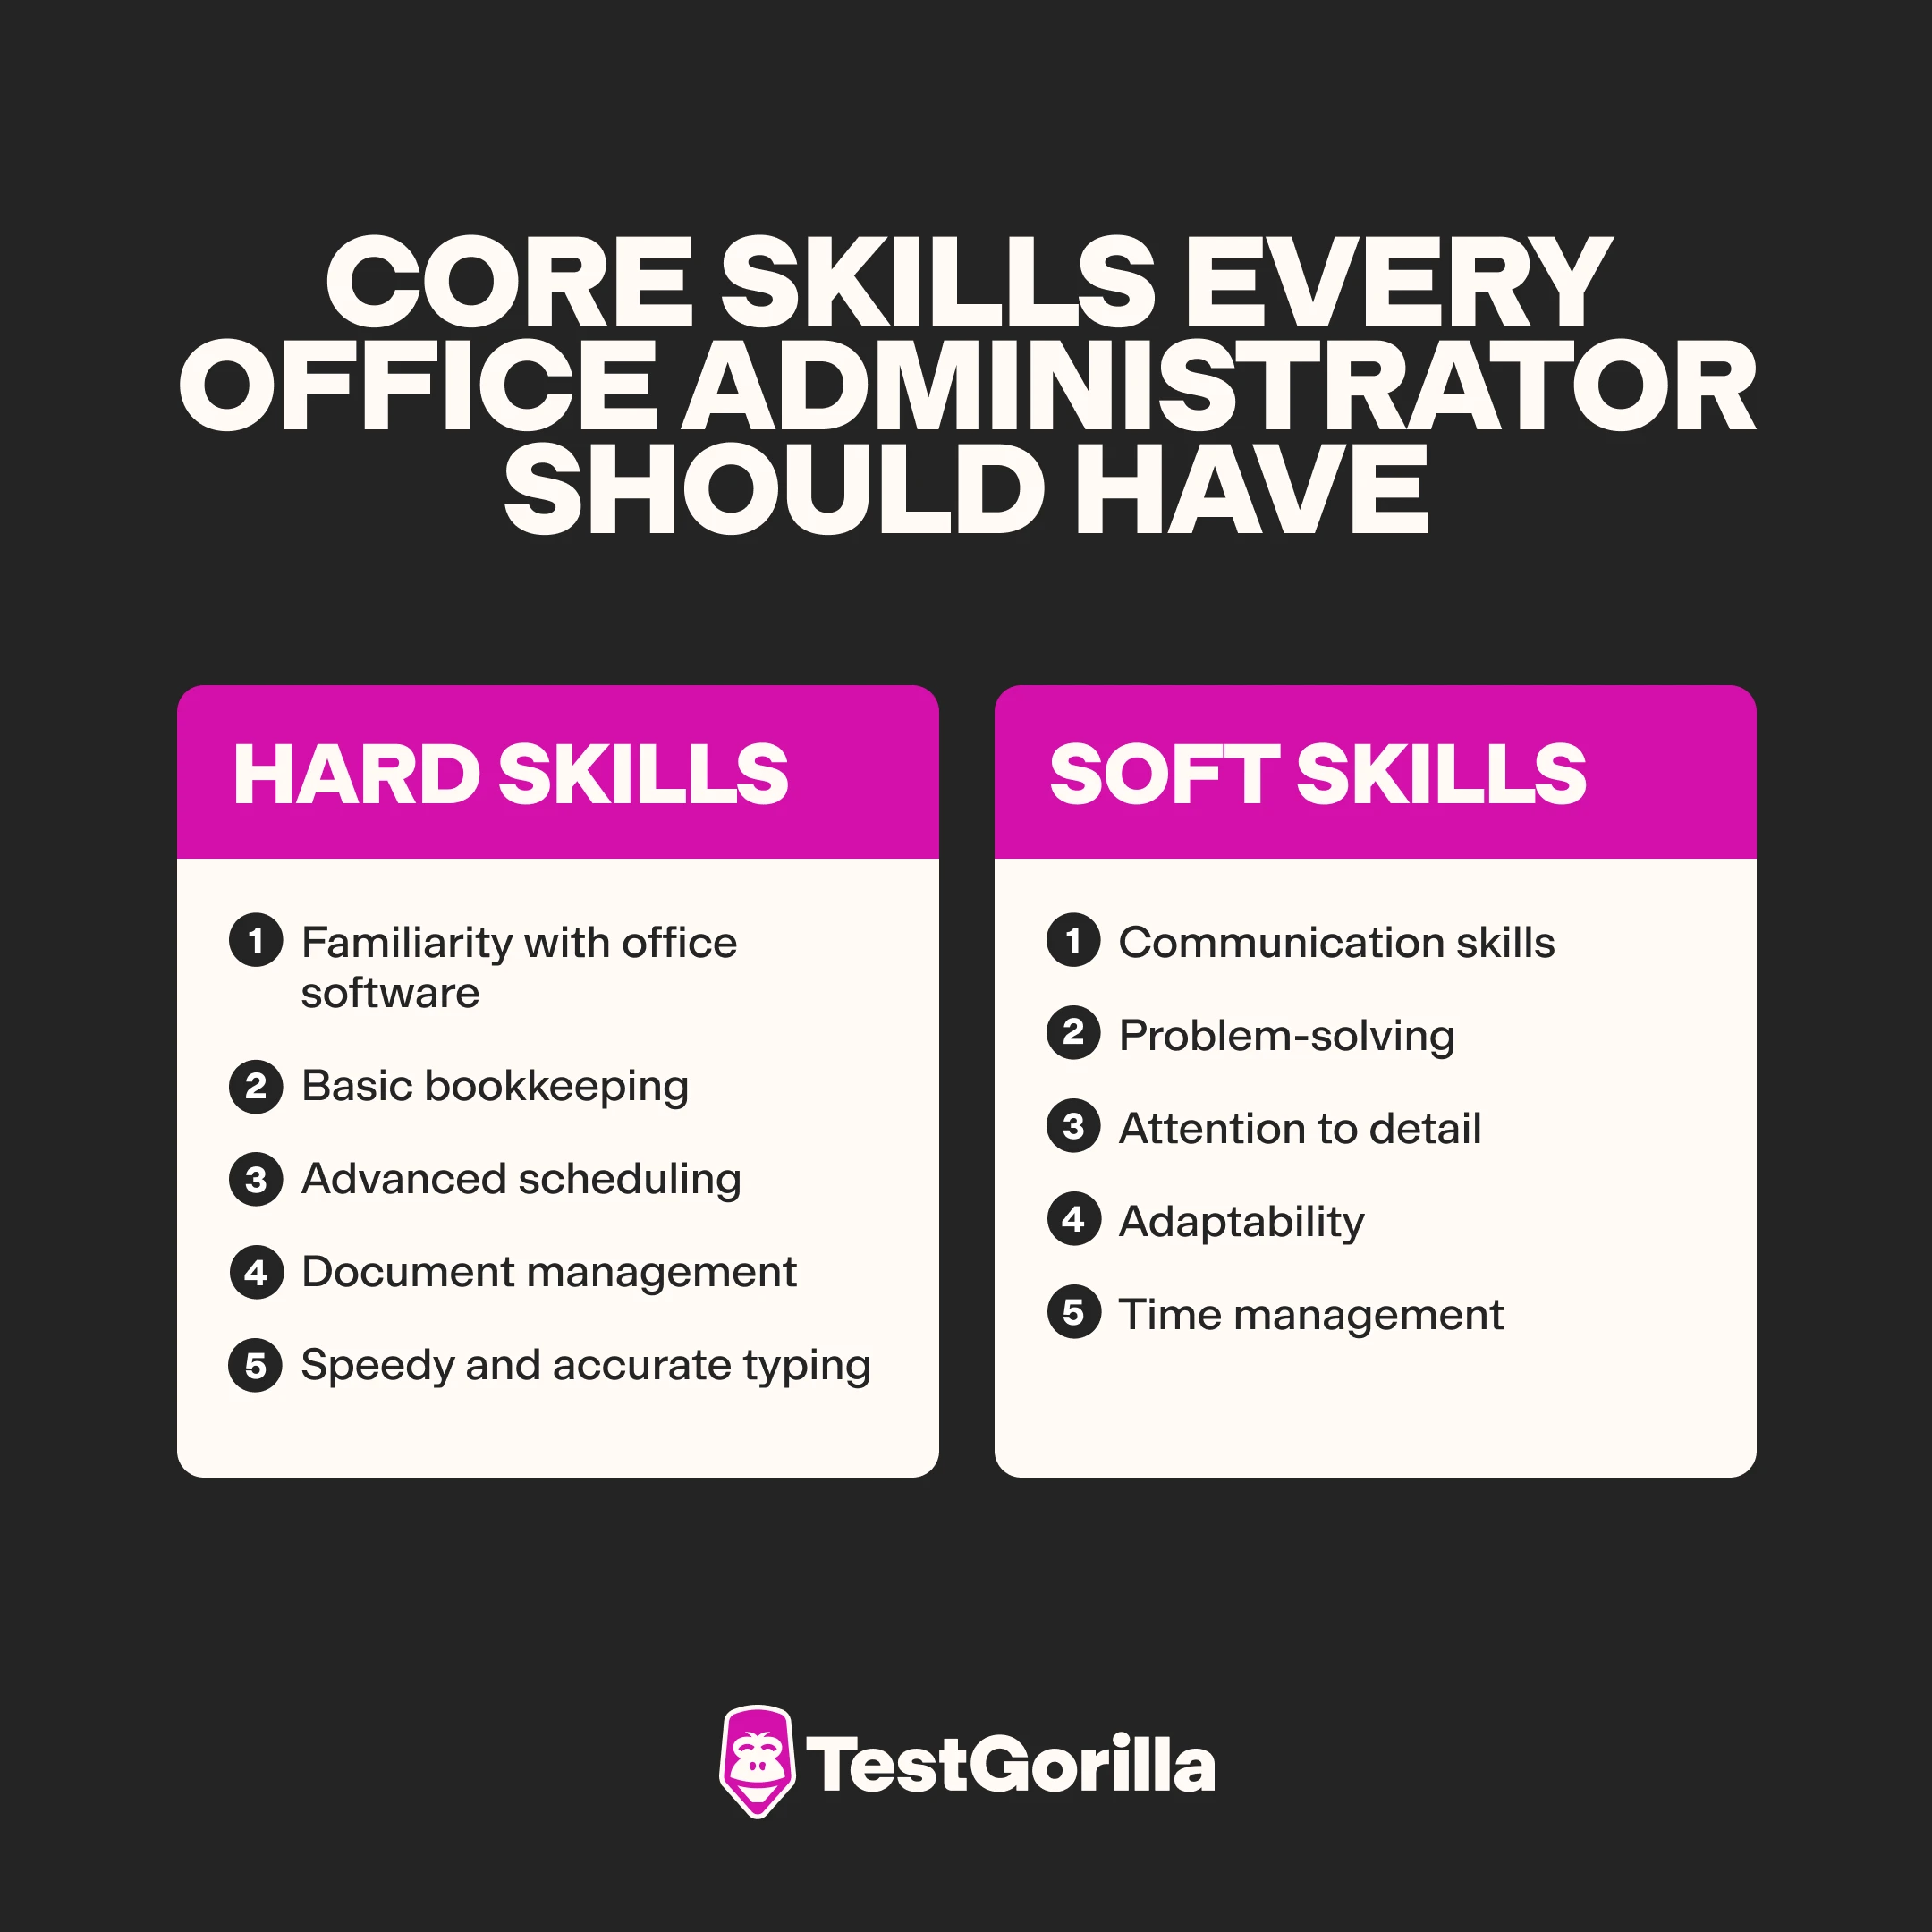 Core-skills-every-office-administrator-should-have